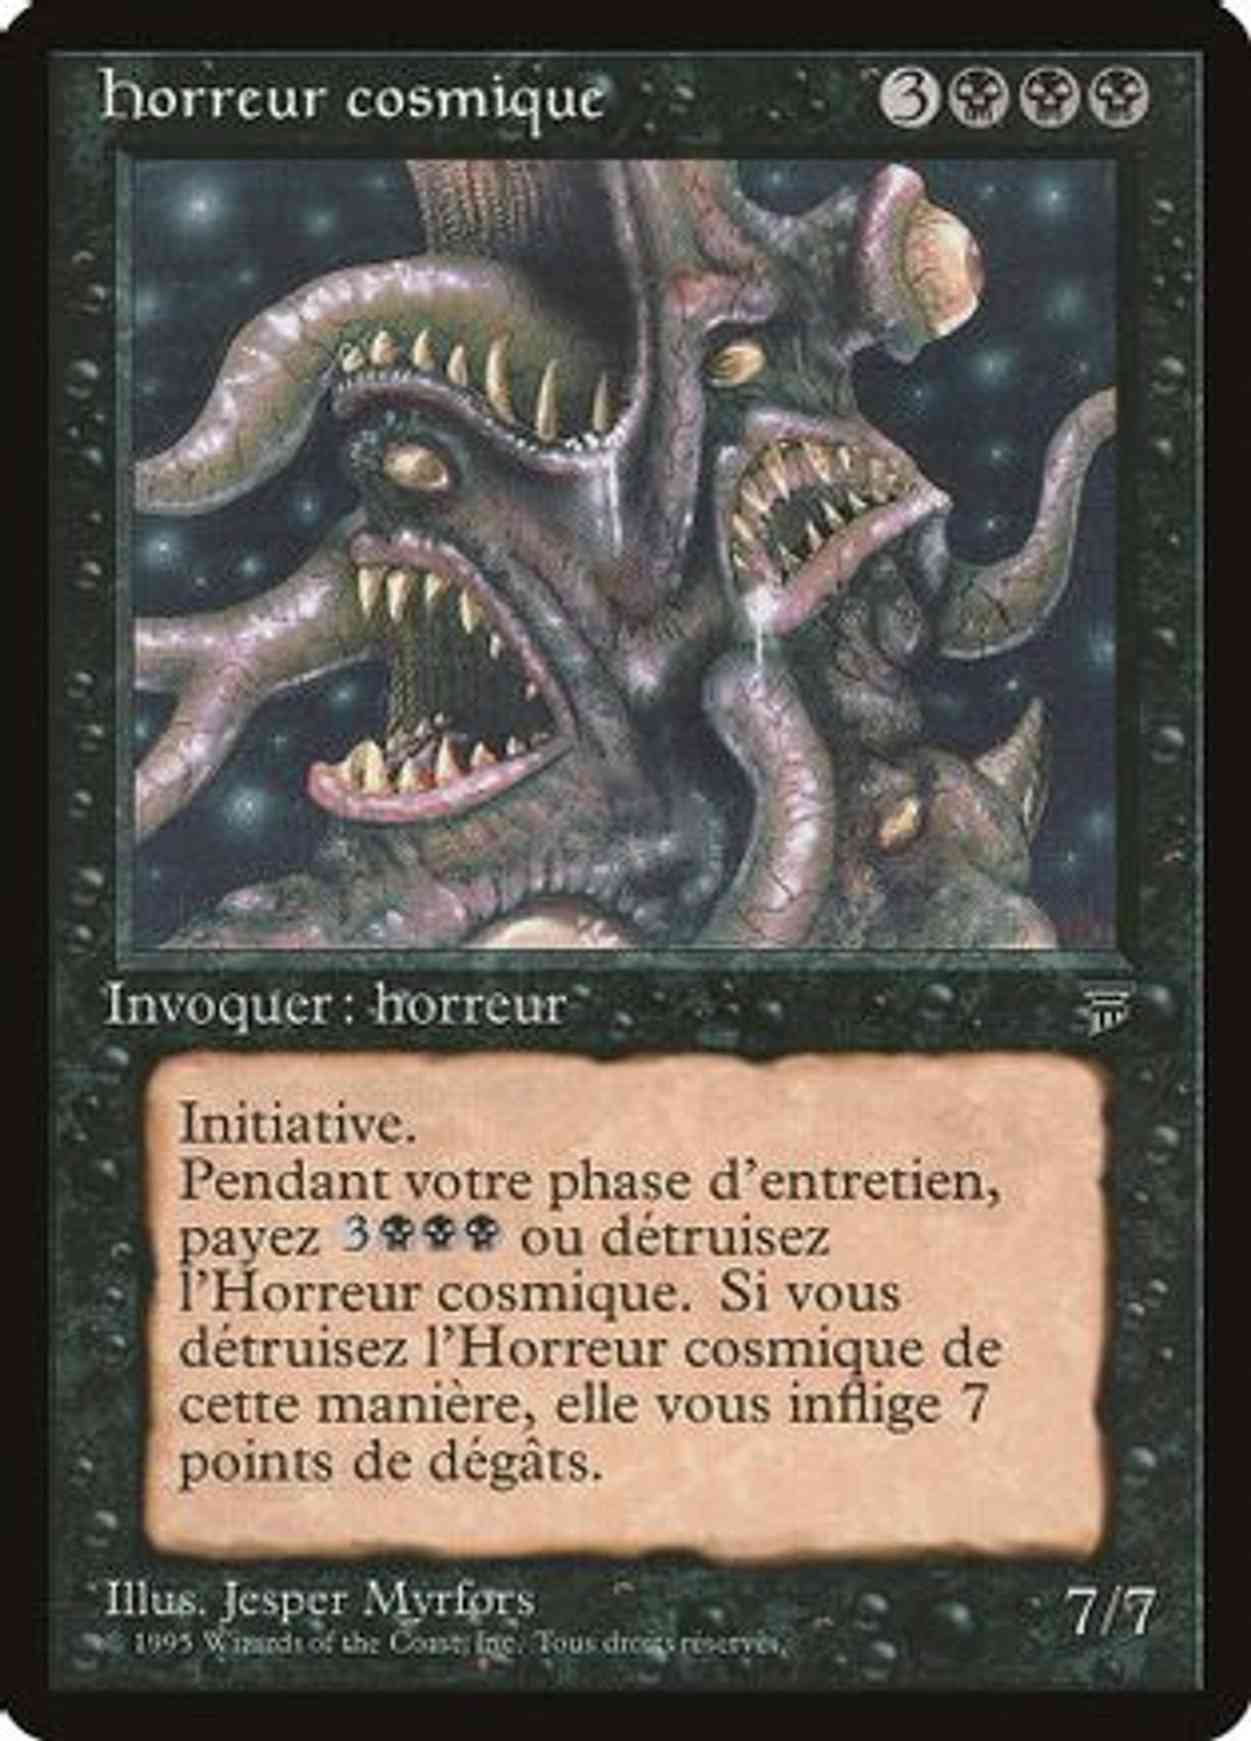 Cosmic Horror (French) - "Horreur cosmique" magic card front